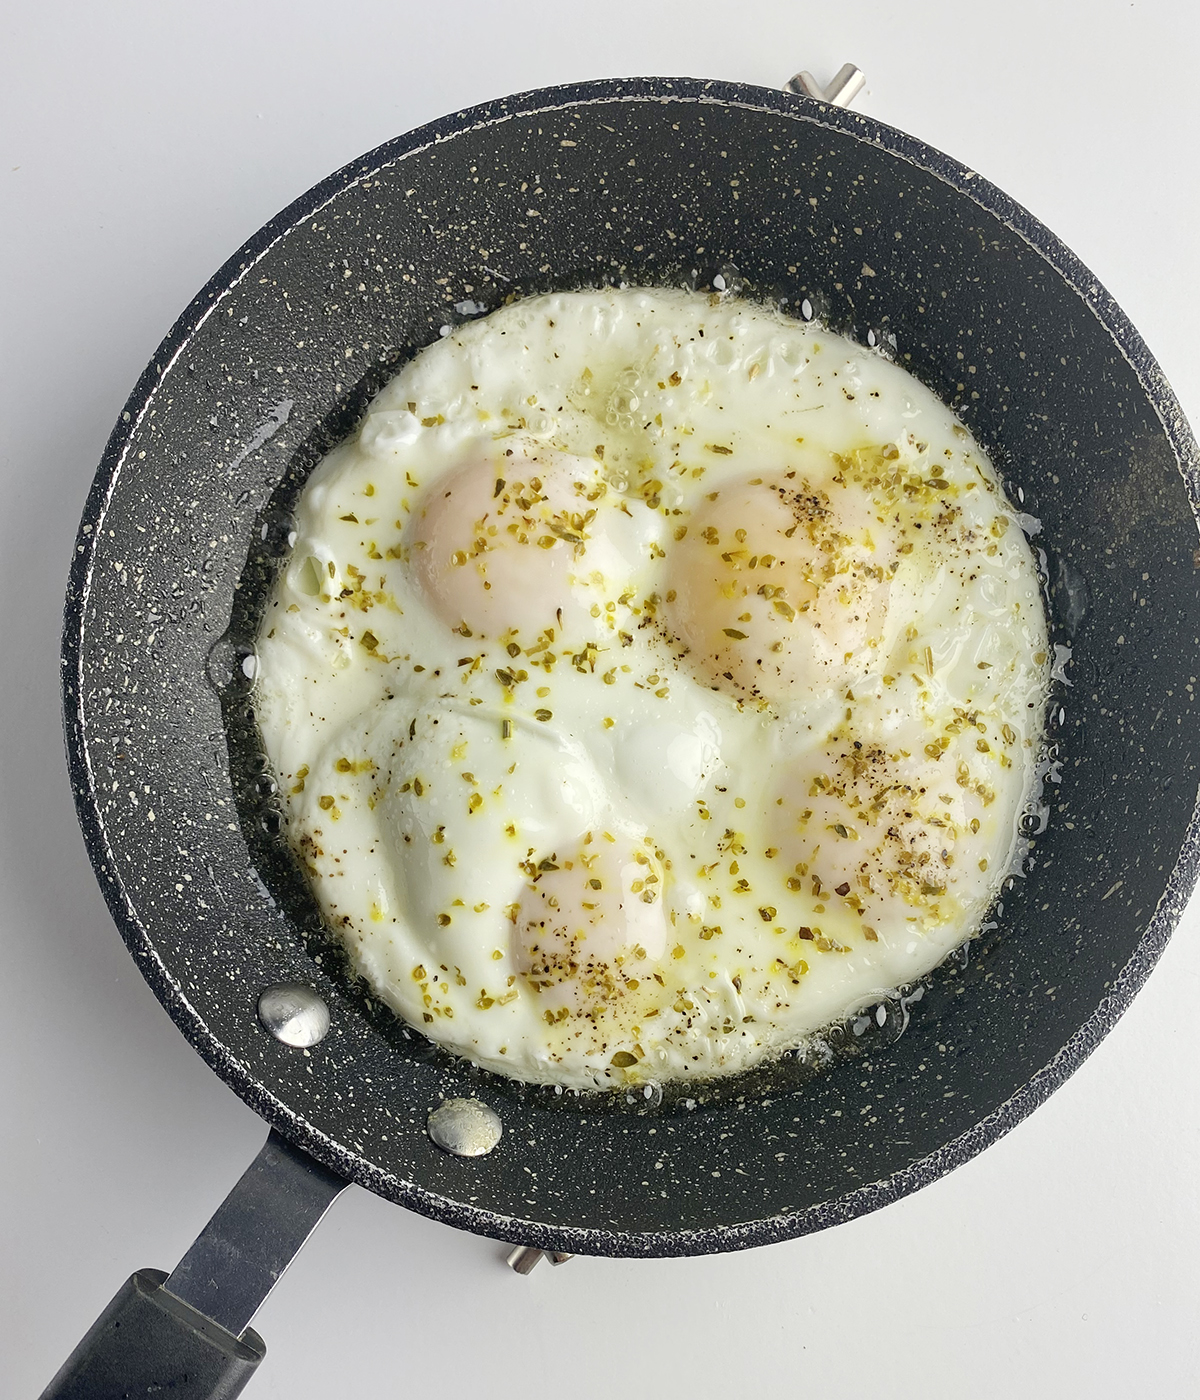 https://www.framedcooks.com/wp-content/uploads/2015/09/Perfect-fried-eggs-cooked-in-a-skillet.jpg